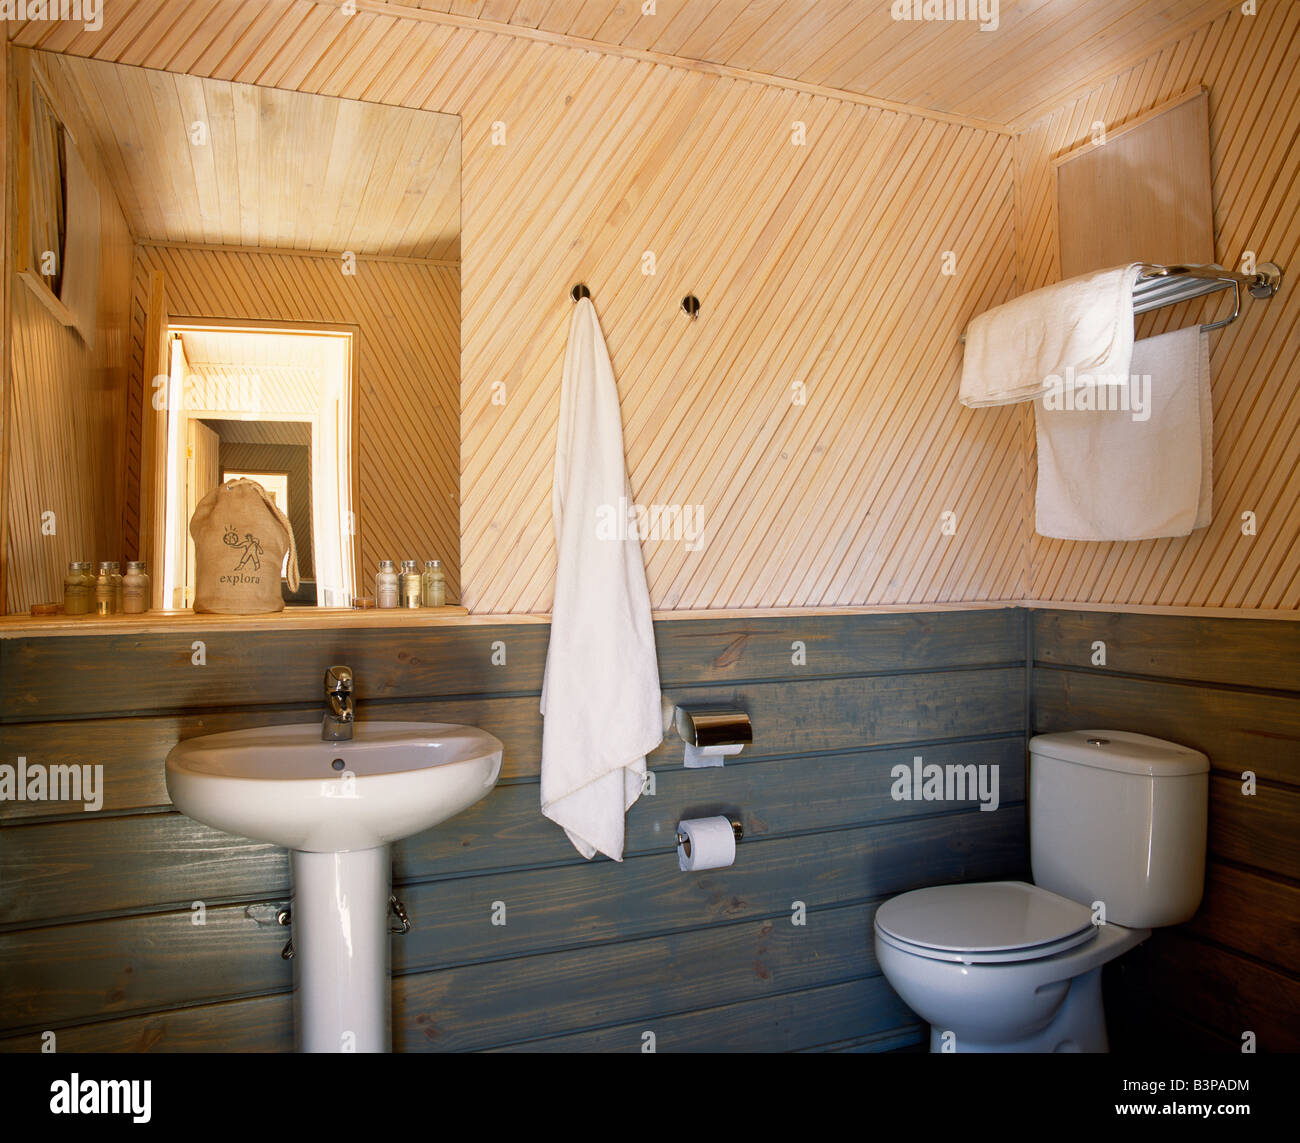 Chile, Parque Nacional Volcan Isluga. Camping in style. Interior of one of the bathrooms in the ablution block Stock Photo